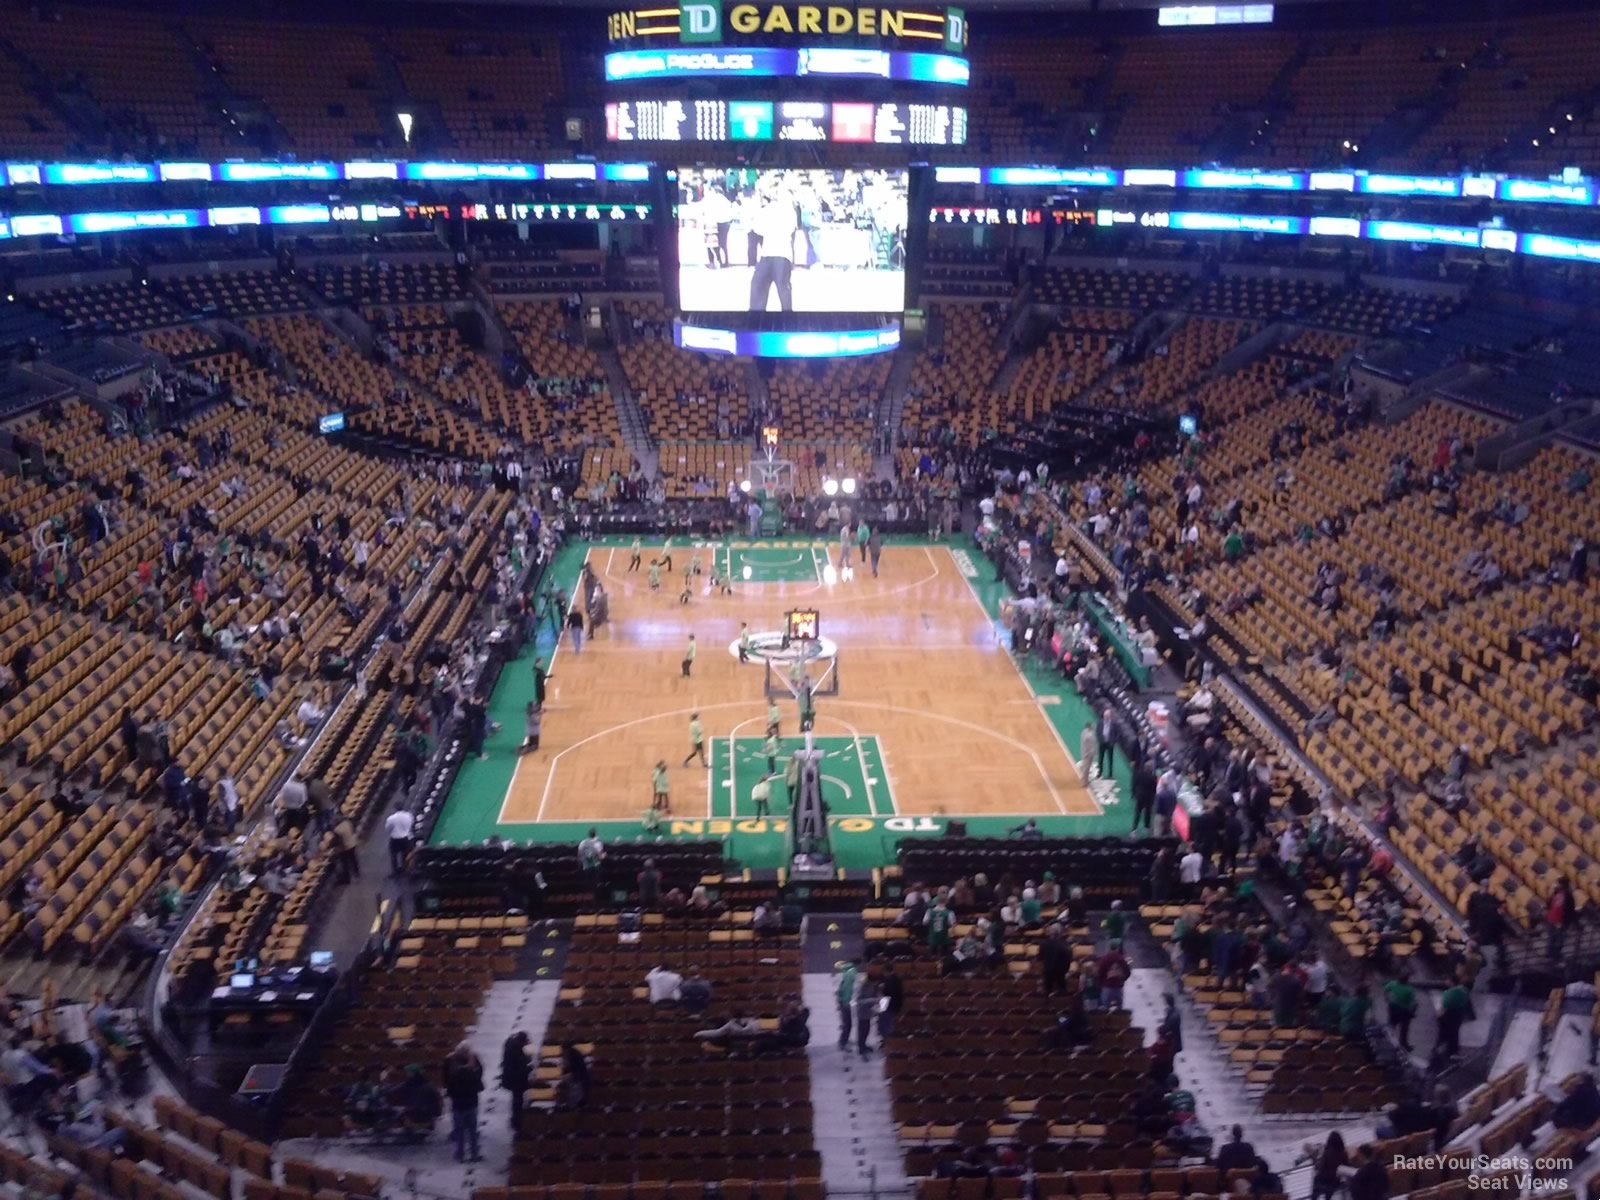 section 308, row 9 seat view  for basketball - td garden